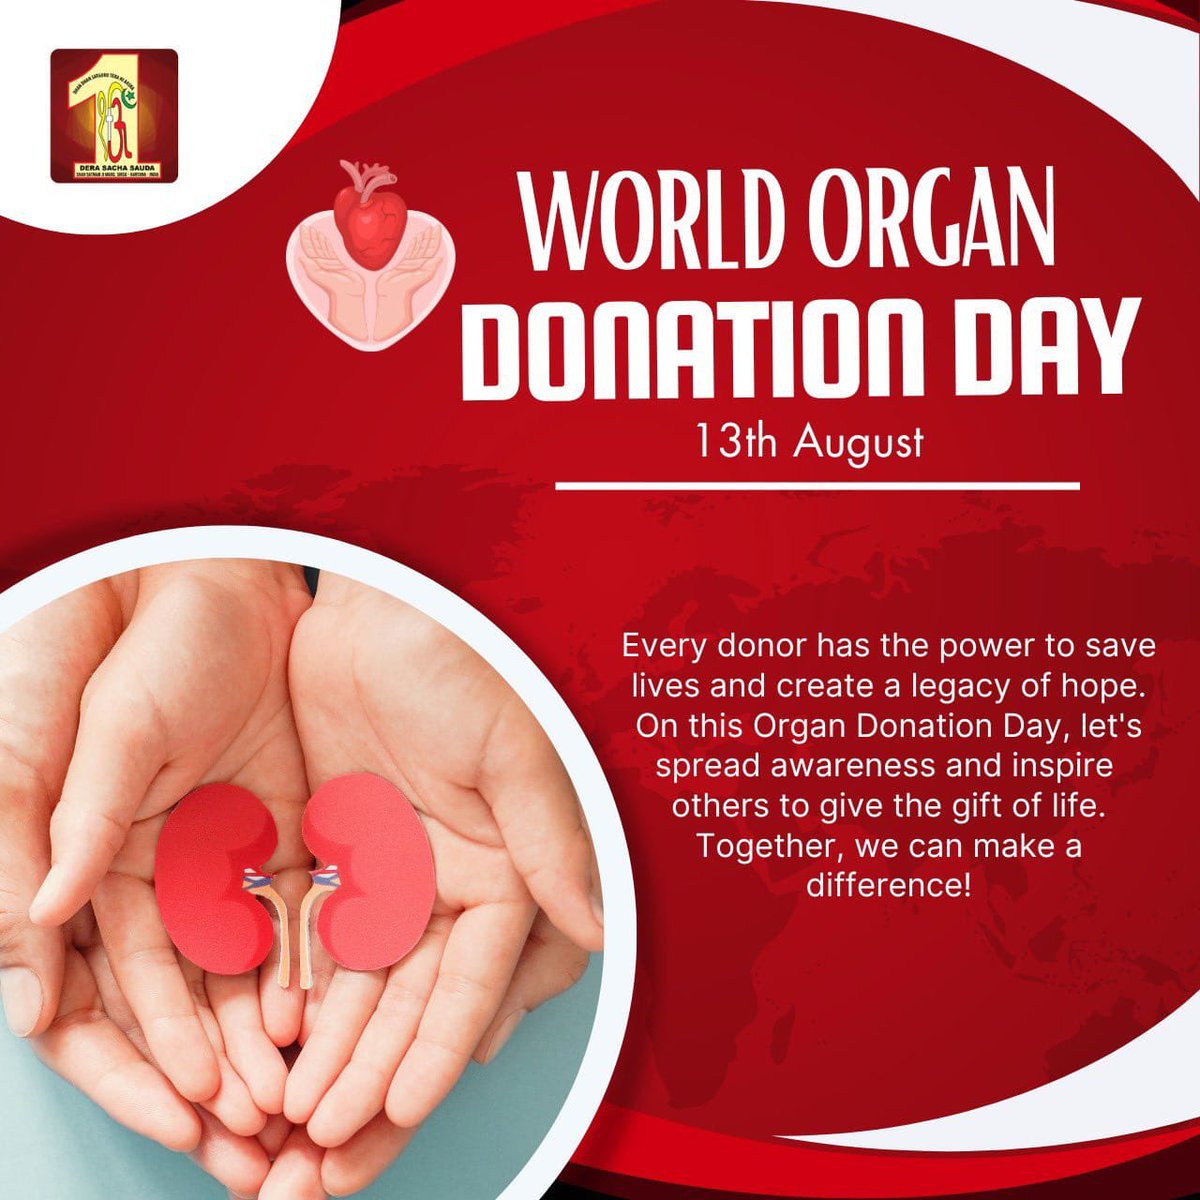 Inspired by Saint MSG Insan, followers of Dera Sacha Sauda take a pledge to donate their organs after death and save lives even after death. #WorldOrganDonationDay